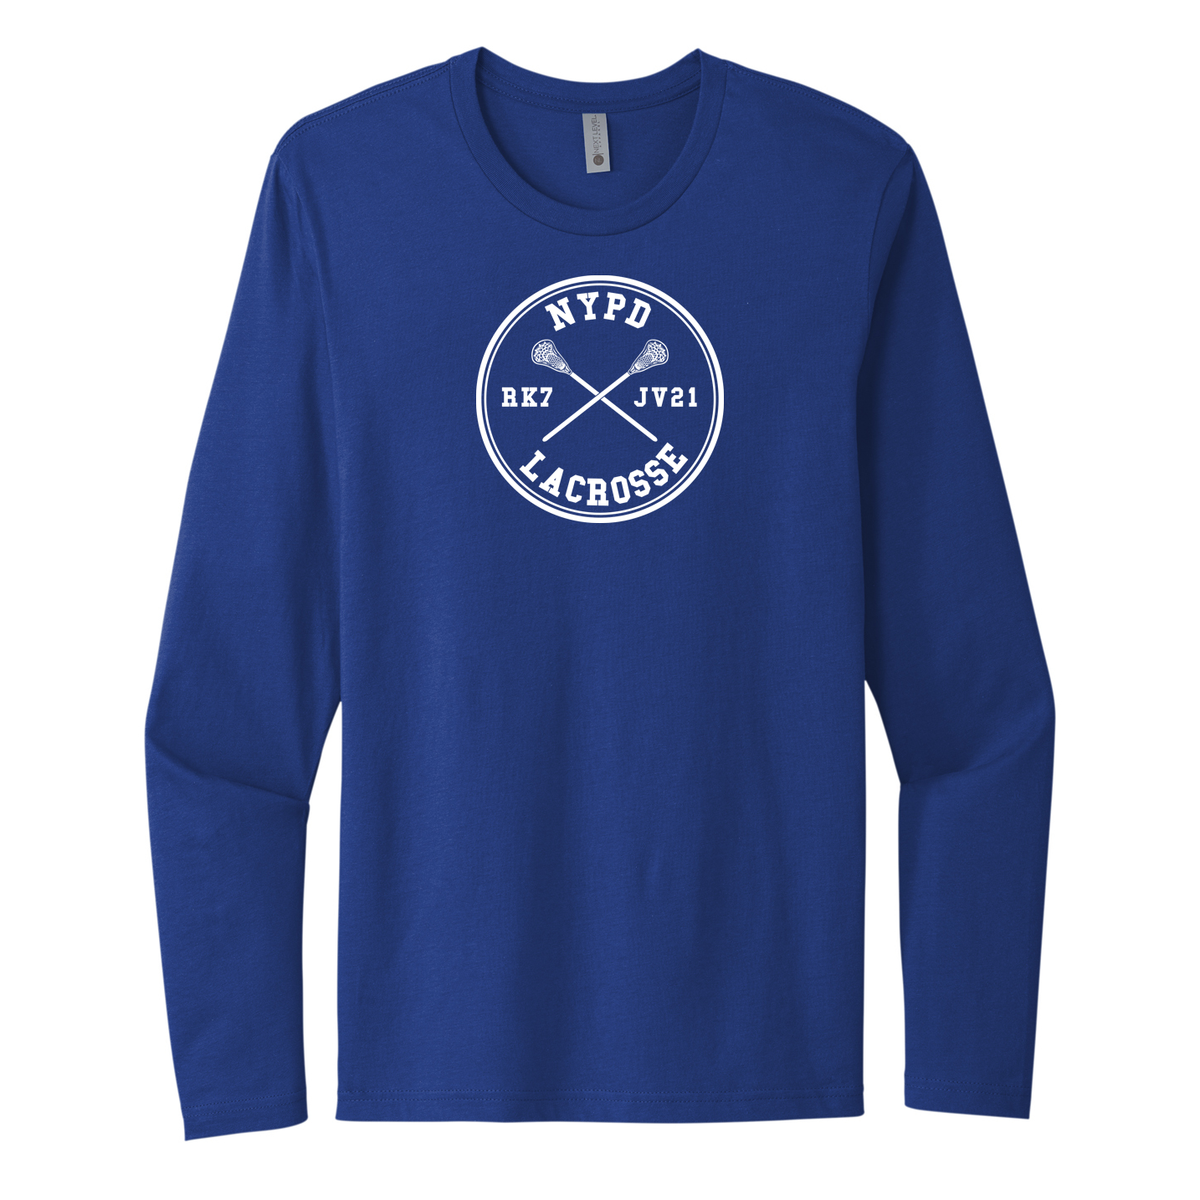 NYPD Lacrosse Cotton Long Sleeve